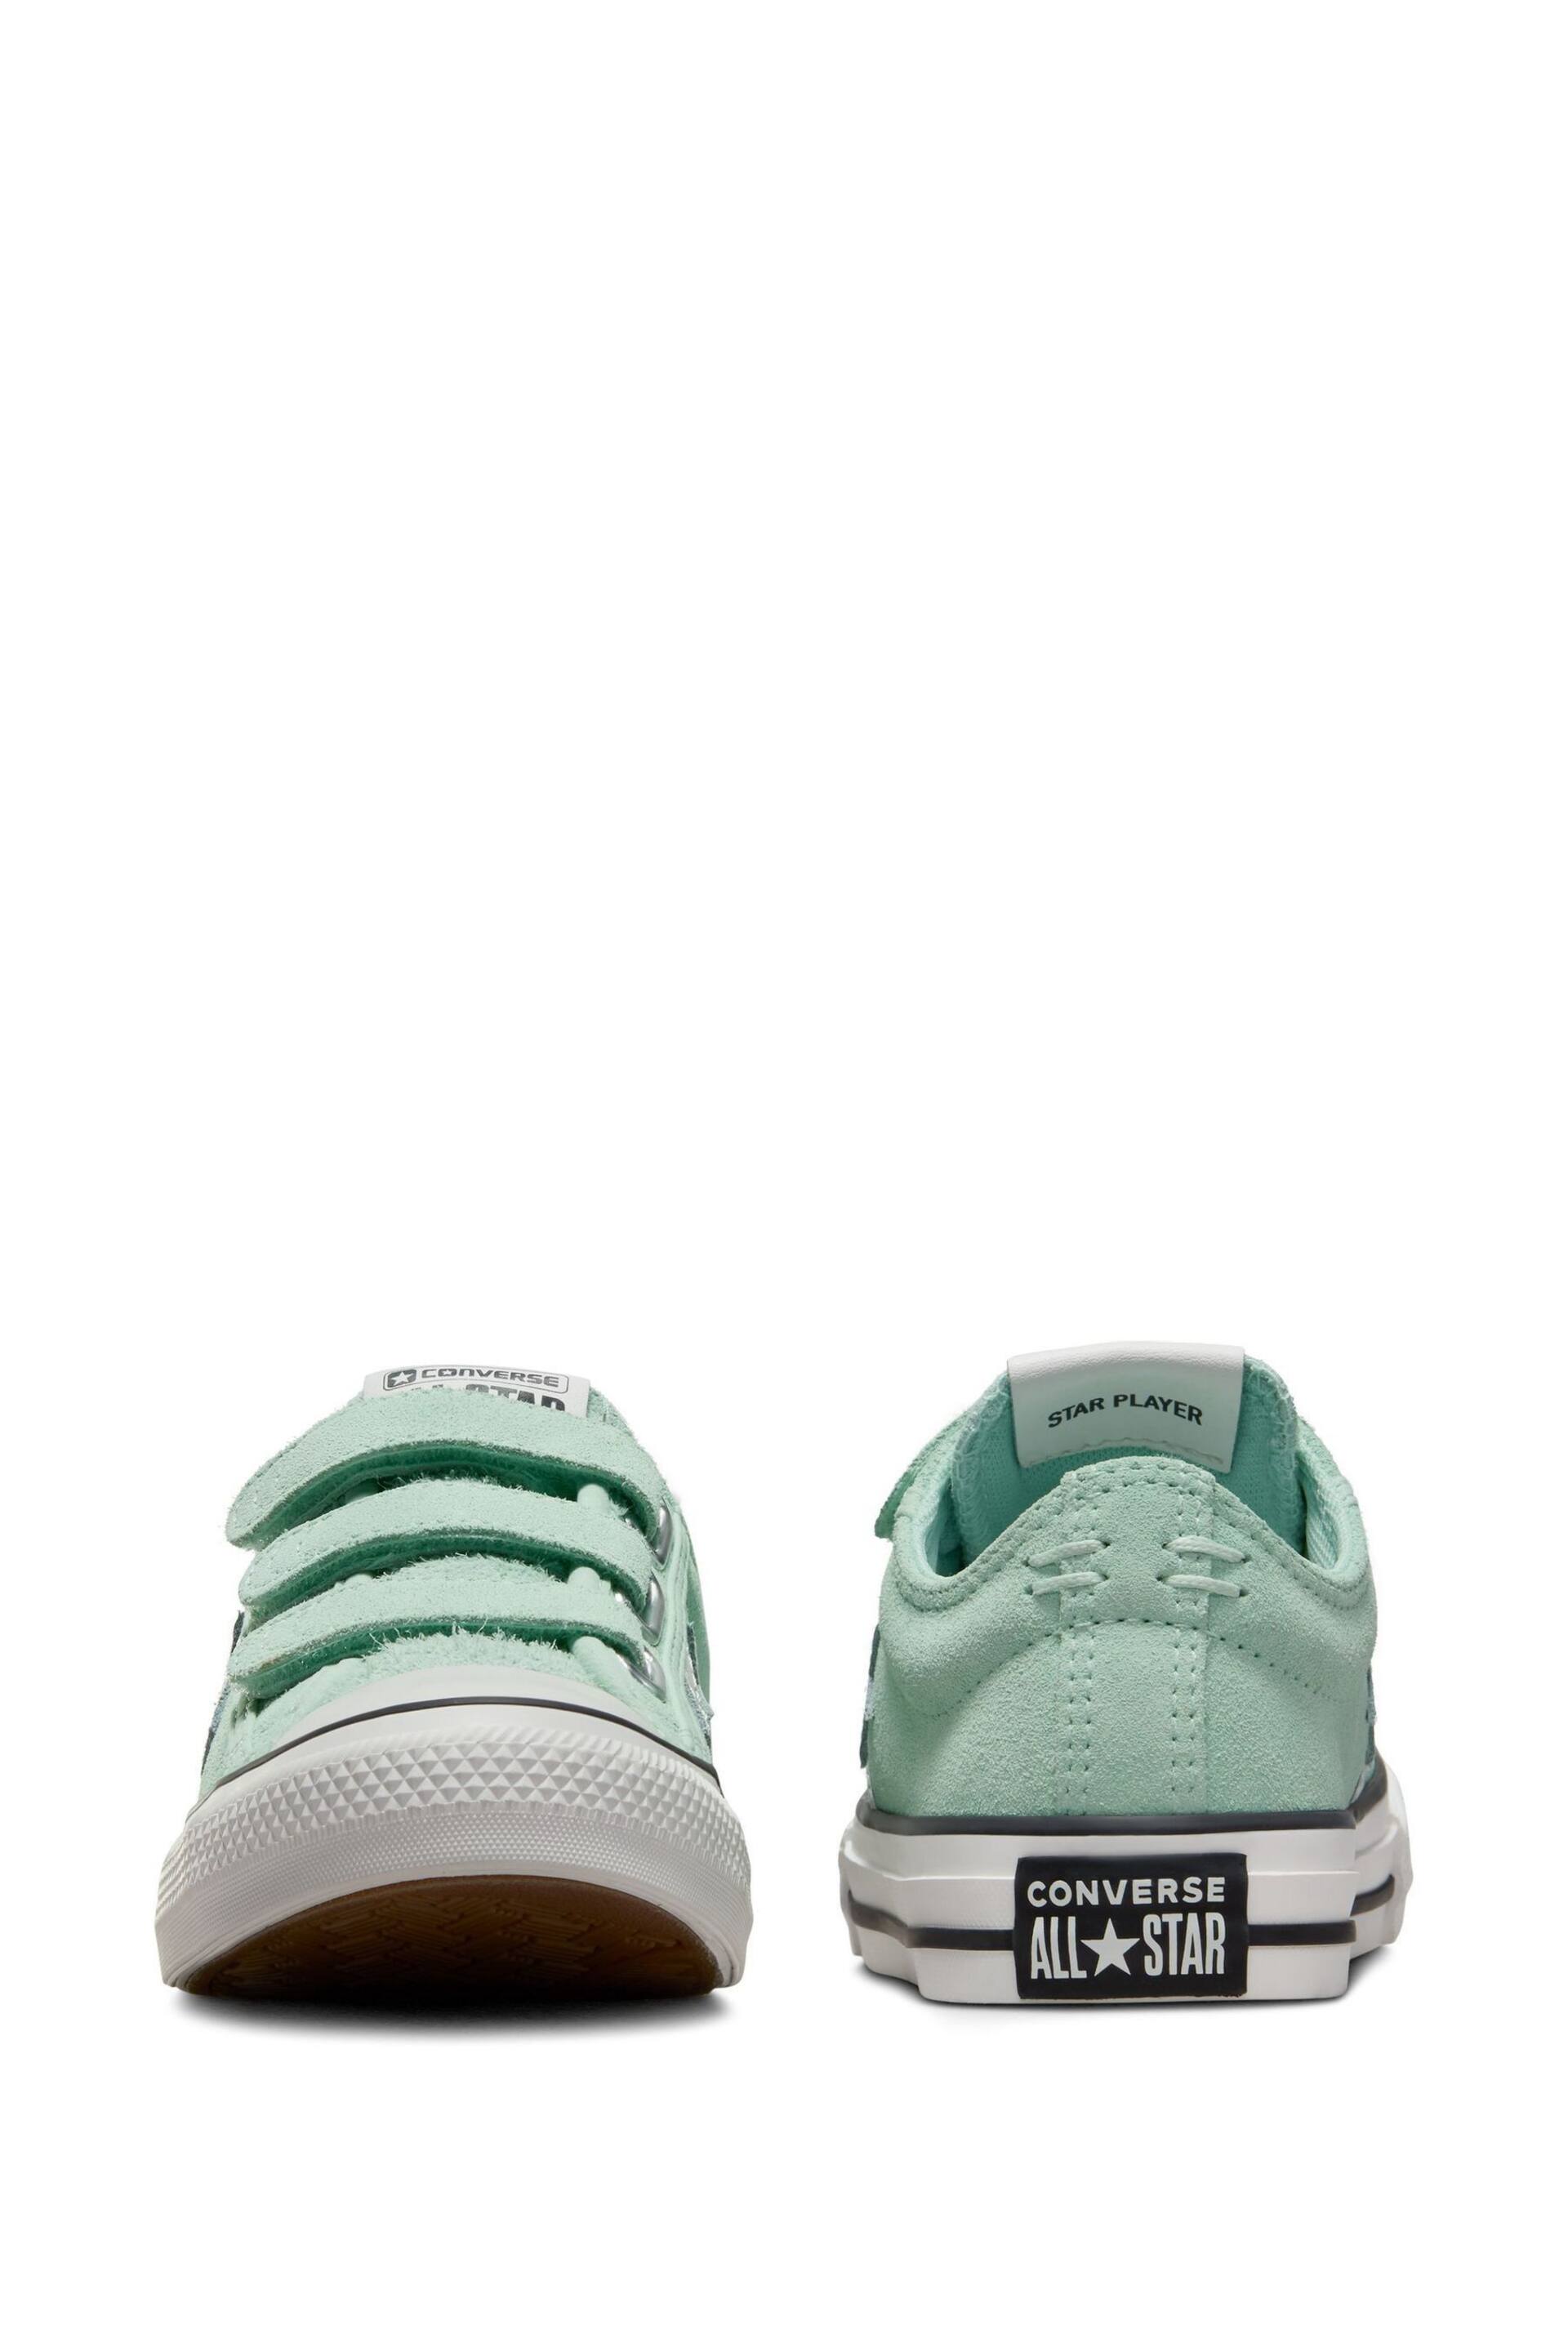 Converse Green Junior Star Player 76 3V Trainers - Image 2 of 9